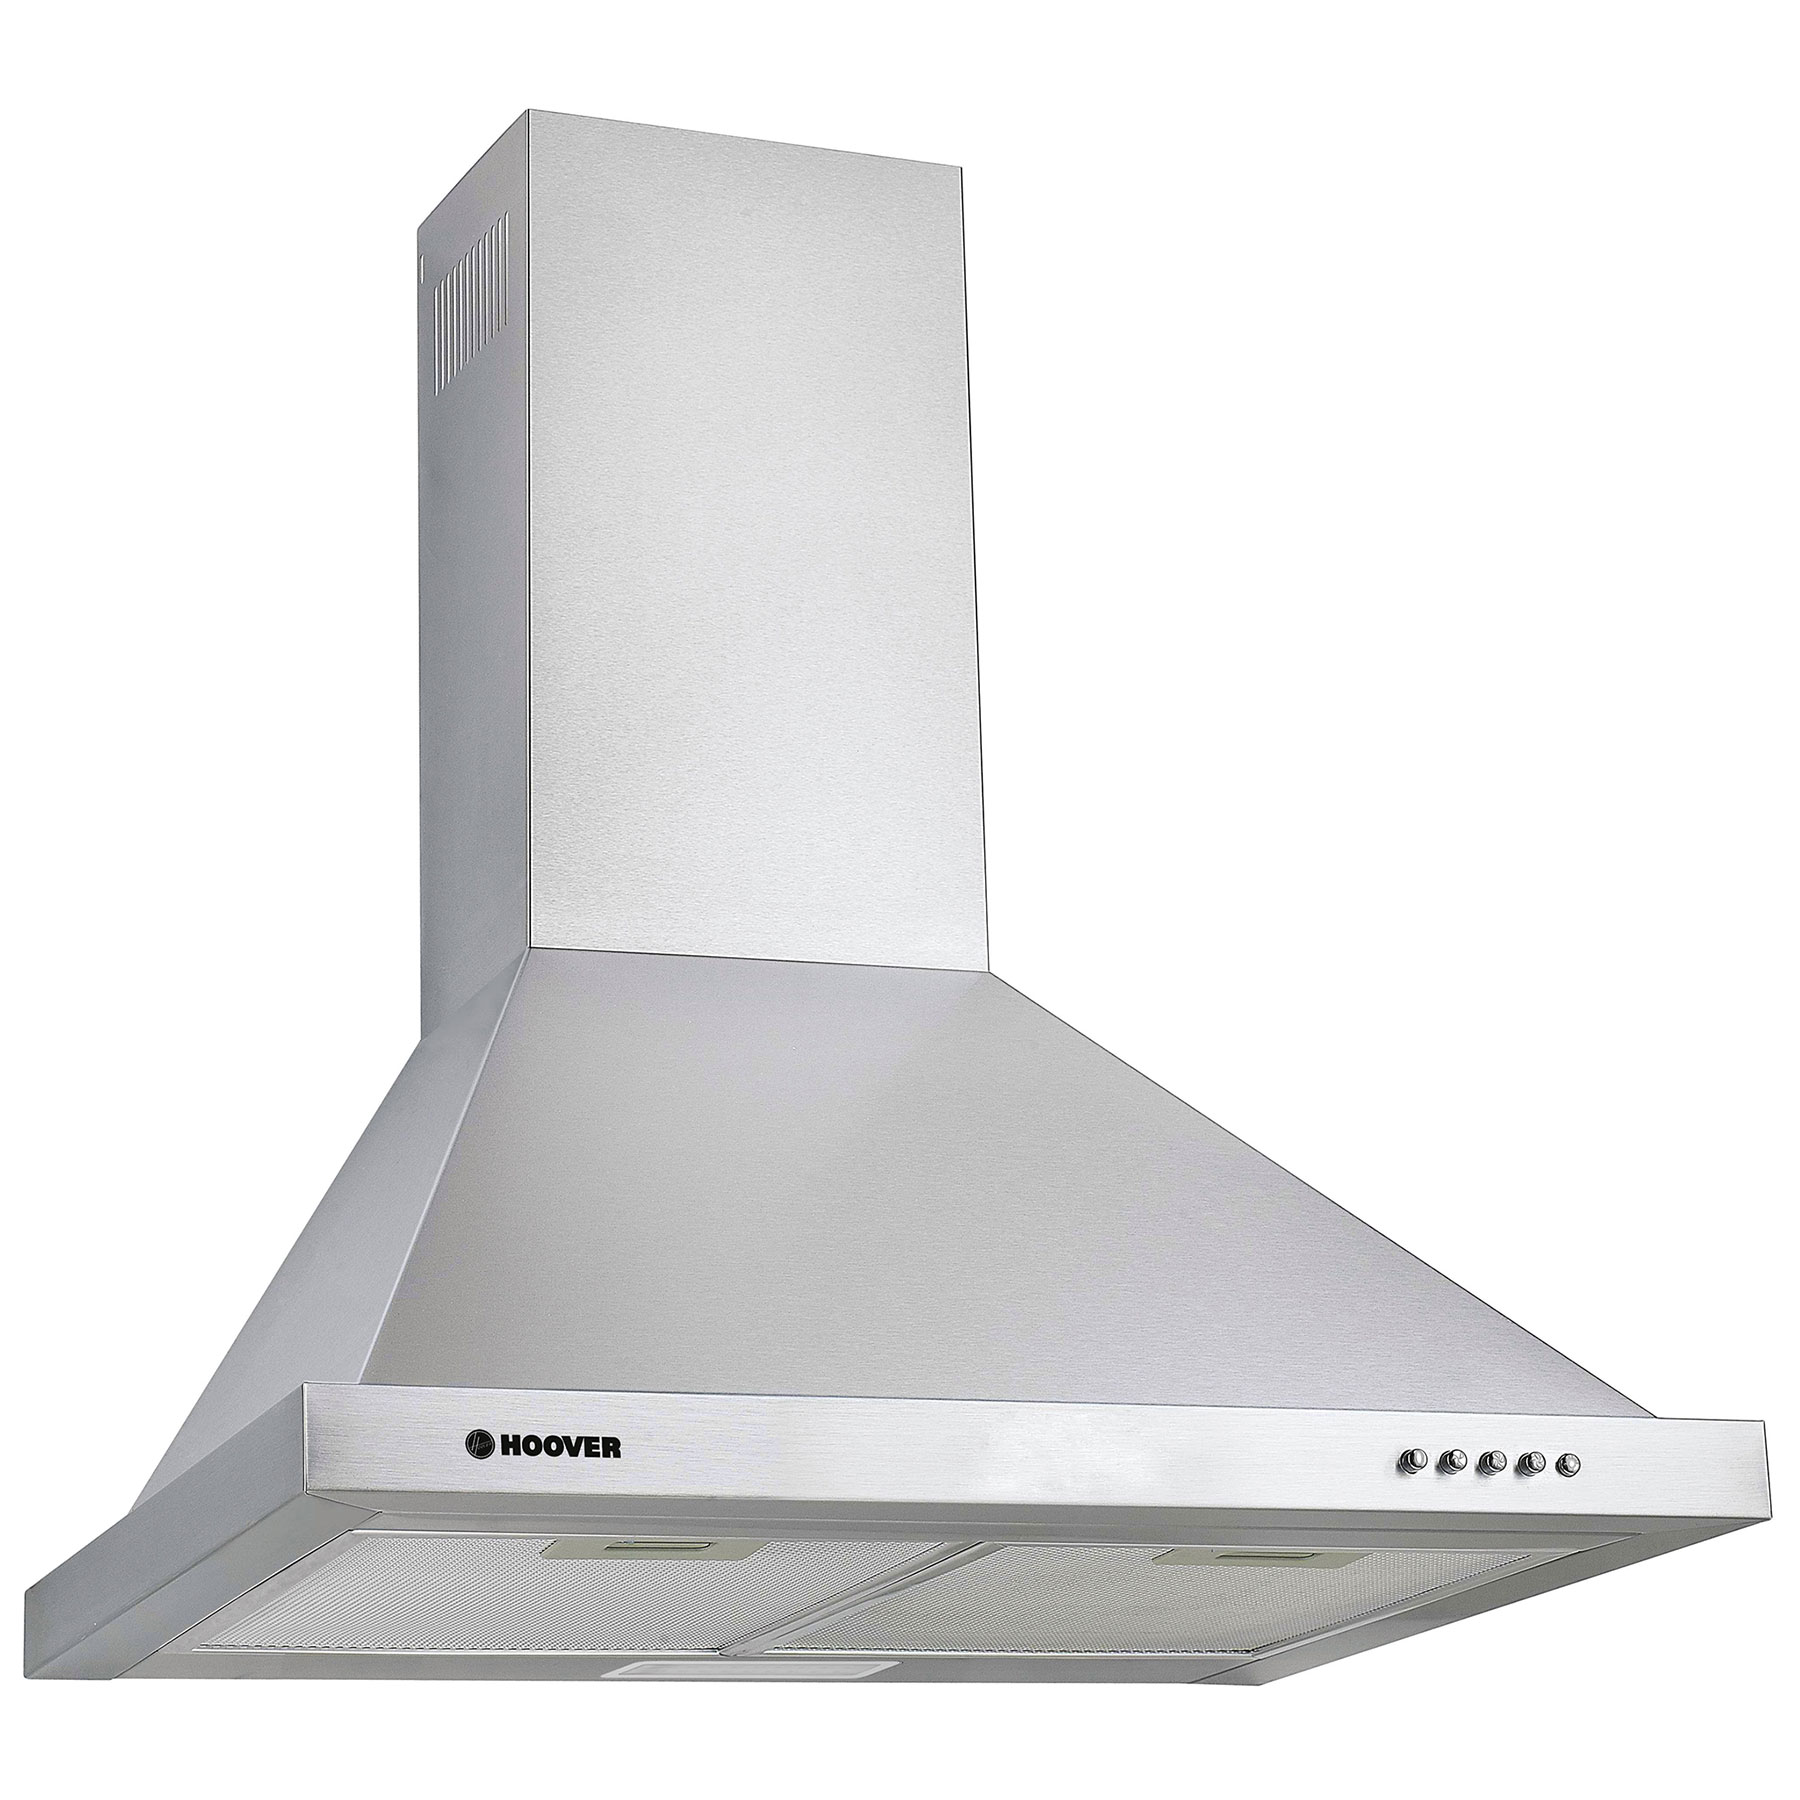 Image of Hoover HCE116NX 60cm Chimney Hood in St Steel 3 Speed Fan C Rated